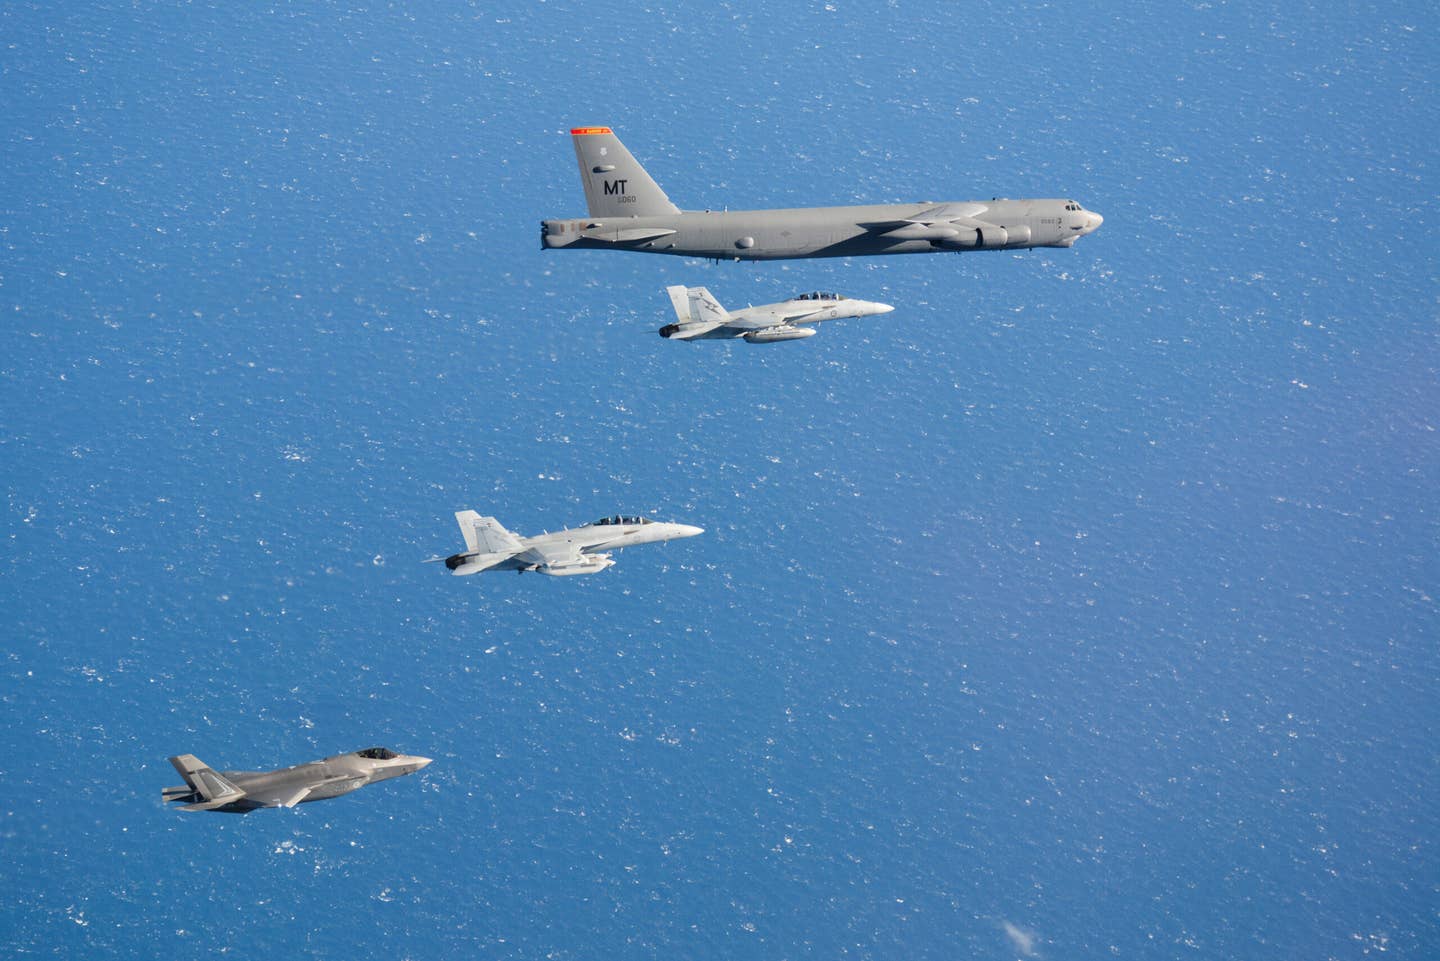 A RAAF F-35A Lightning II, EA-18G Growler, and F/A-18F Super Hornet fly alongside a U.S. Air Force B-52H from the 23rd Expeditionary Bomb Squadron based at Guam during Exercise Talisman Sabre 21. <em>Australian Department of Defense</em>